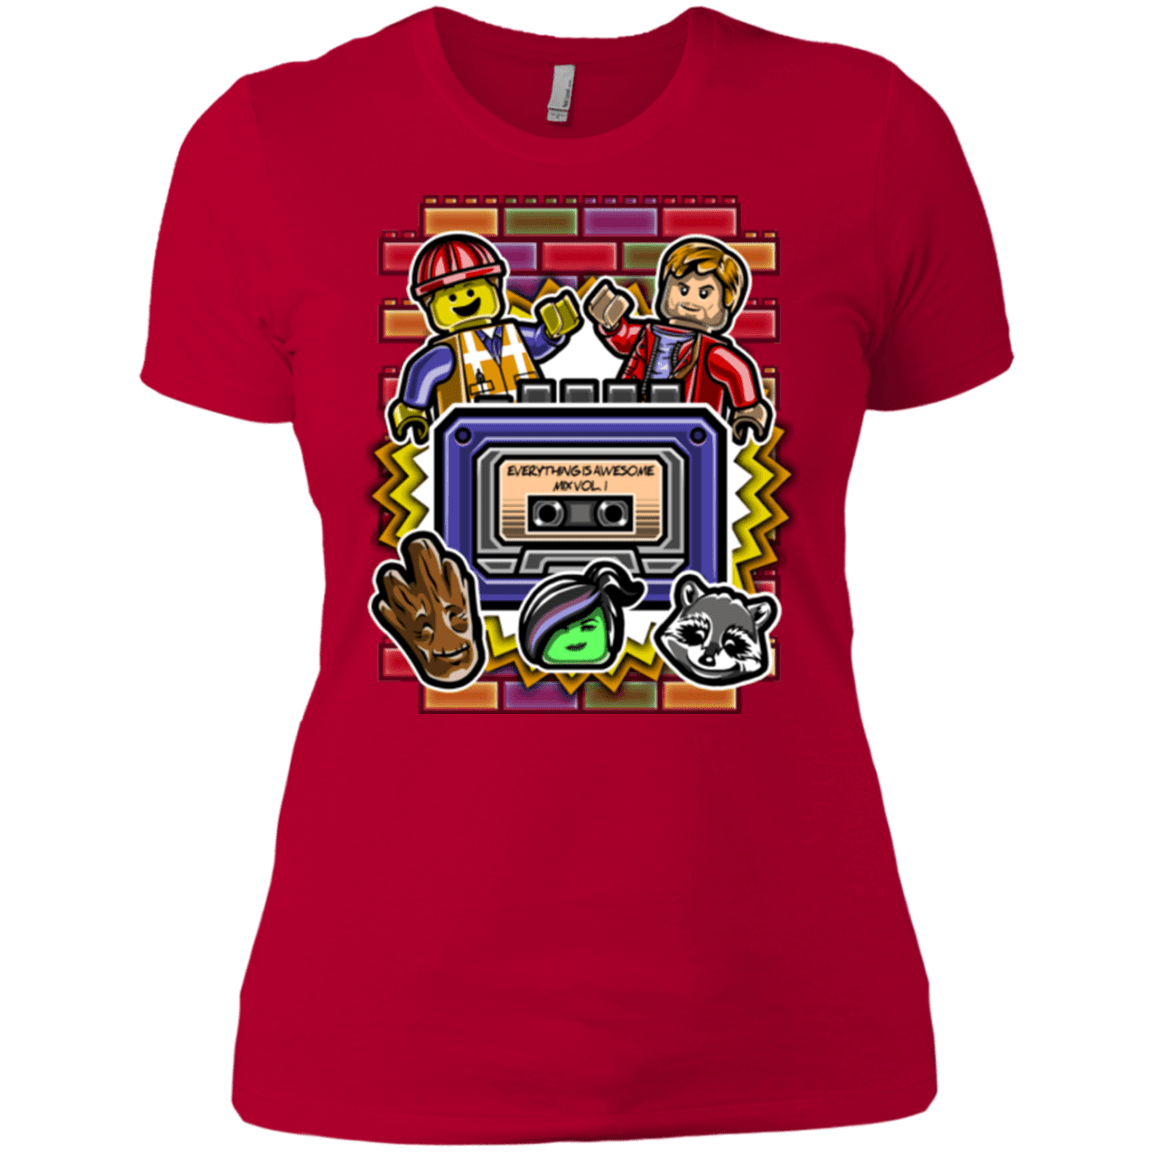 T-Shirts Red / X-Small Everything is awesome mix Women's Premium T-Shirt